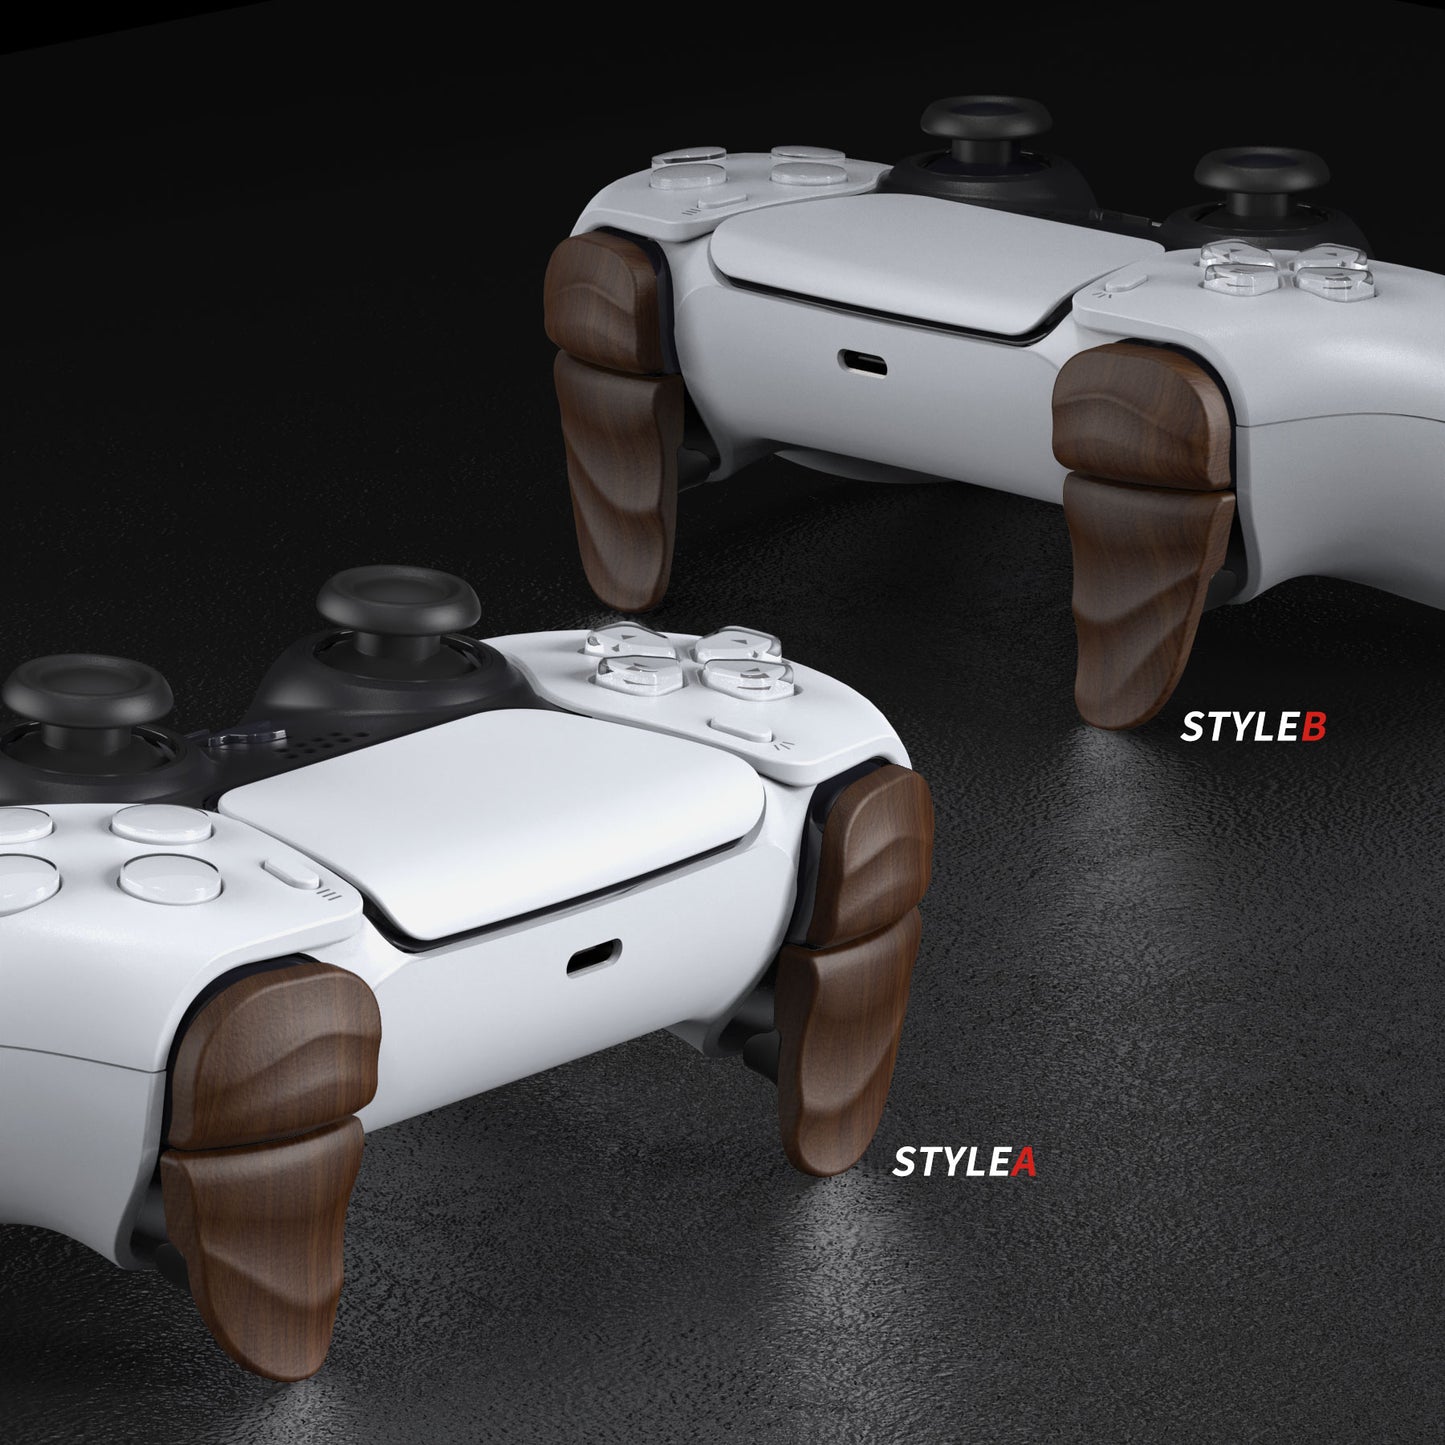 PlayVital Dune 2 Pairs Trigger Stop Shoulder Buttons Extension Kit for ps5 Controller, Stopper Bumper Trigger Extenders Game Improvement Adjusters for ps5 Controller - Wood Grain - YCPFS002 PlayVital